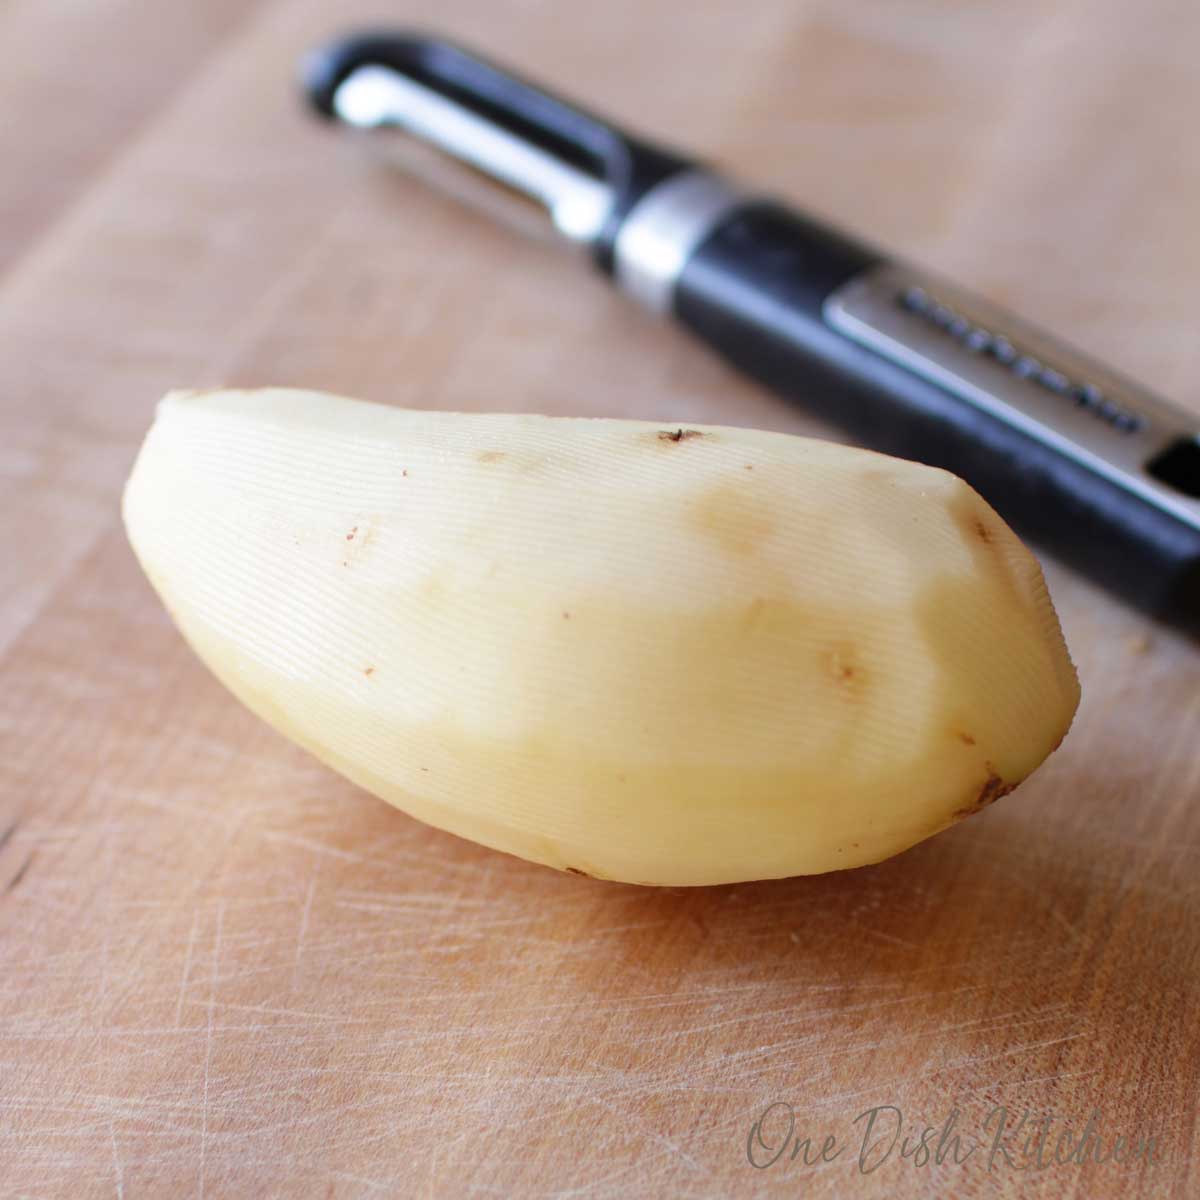 One peeled potato next to a peeler on a wooden cutting board.